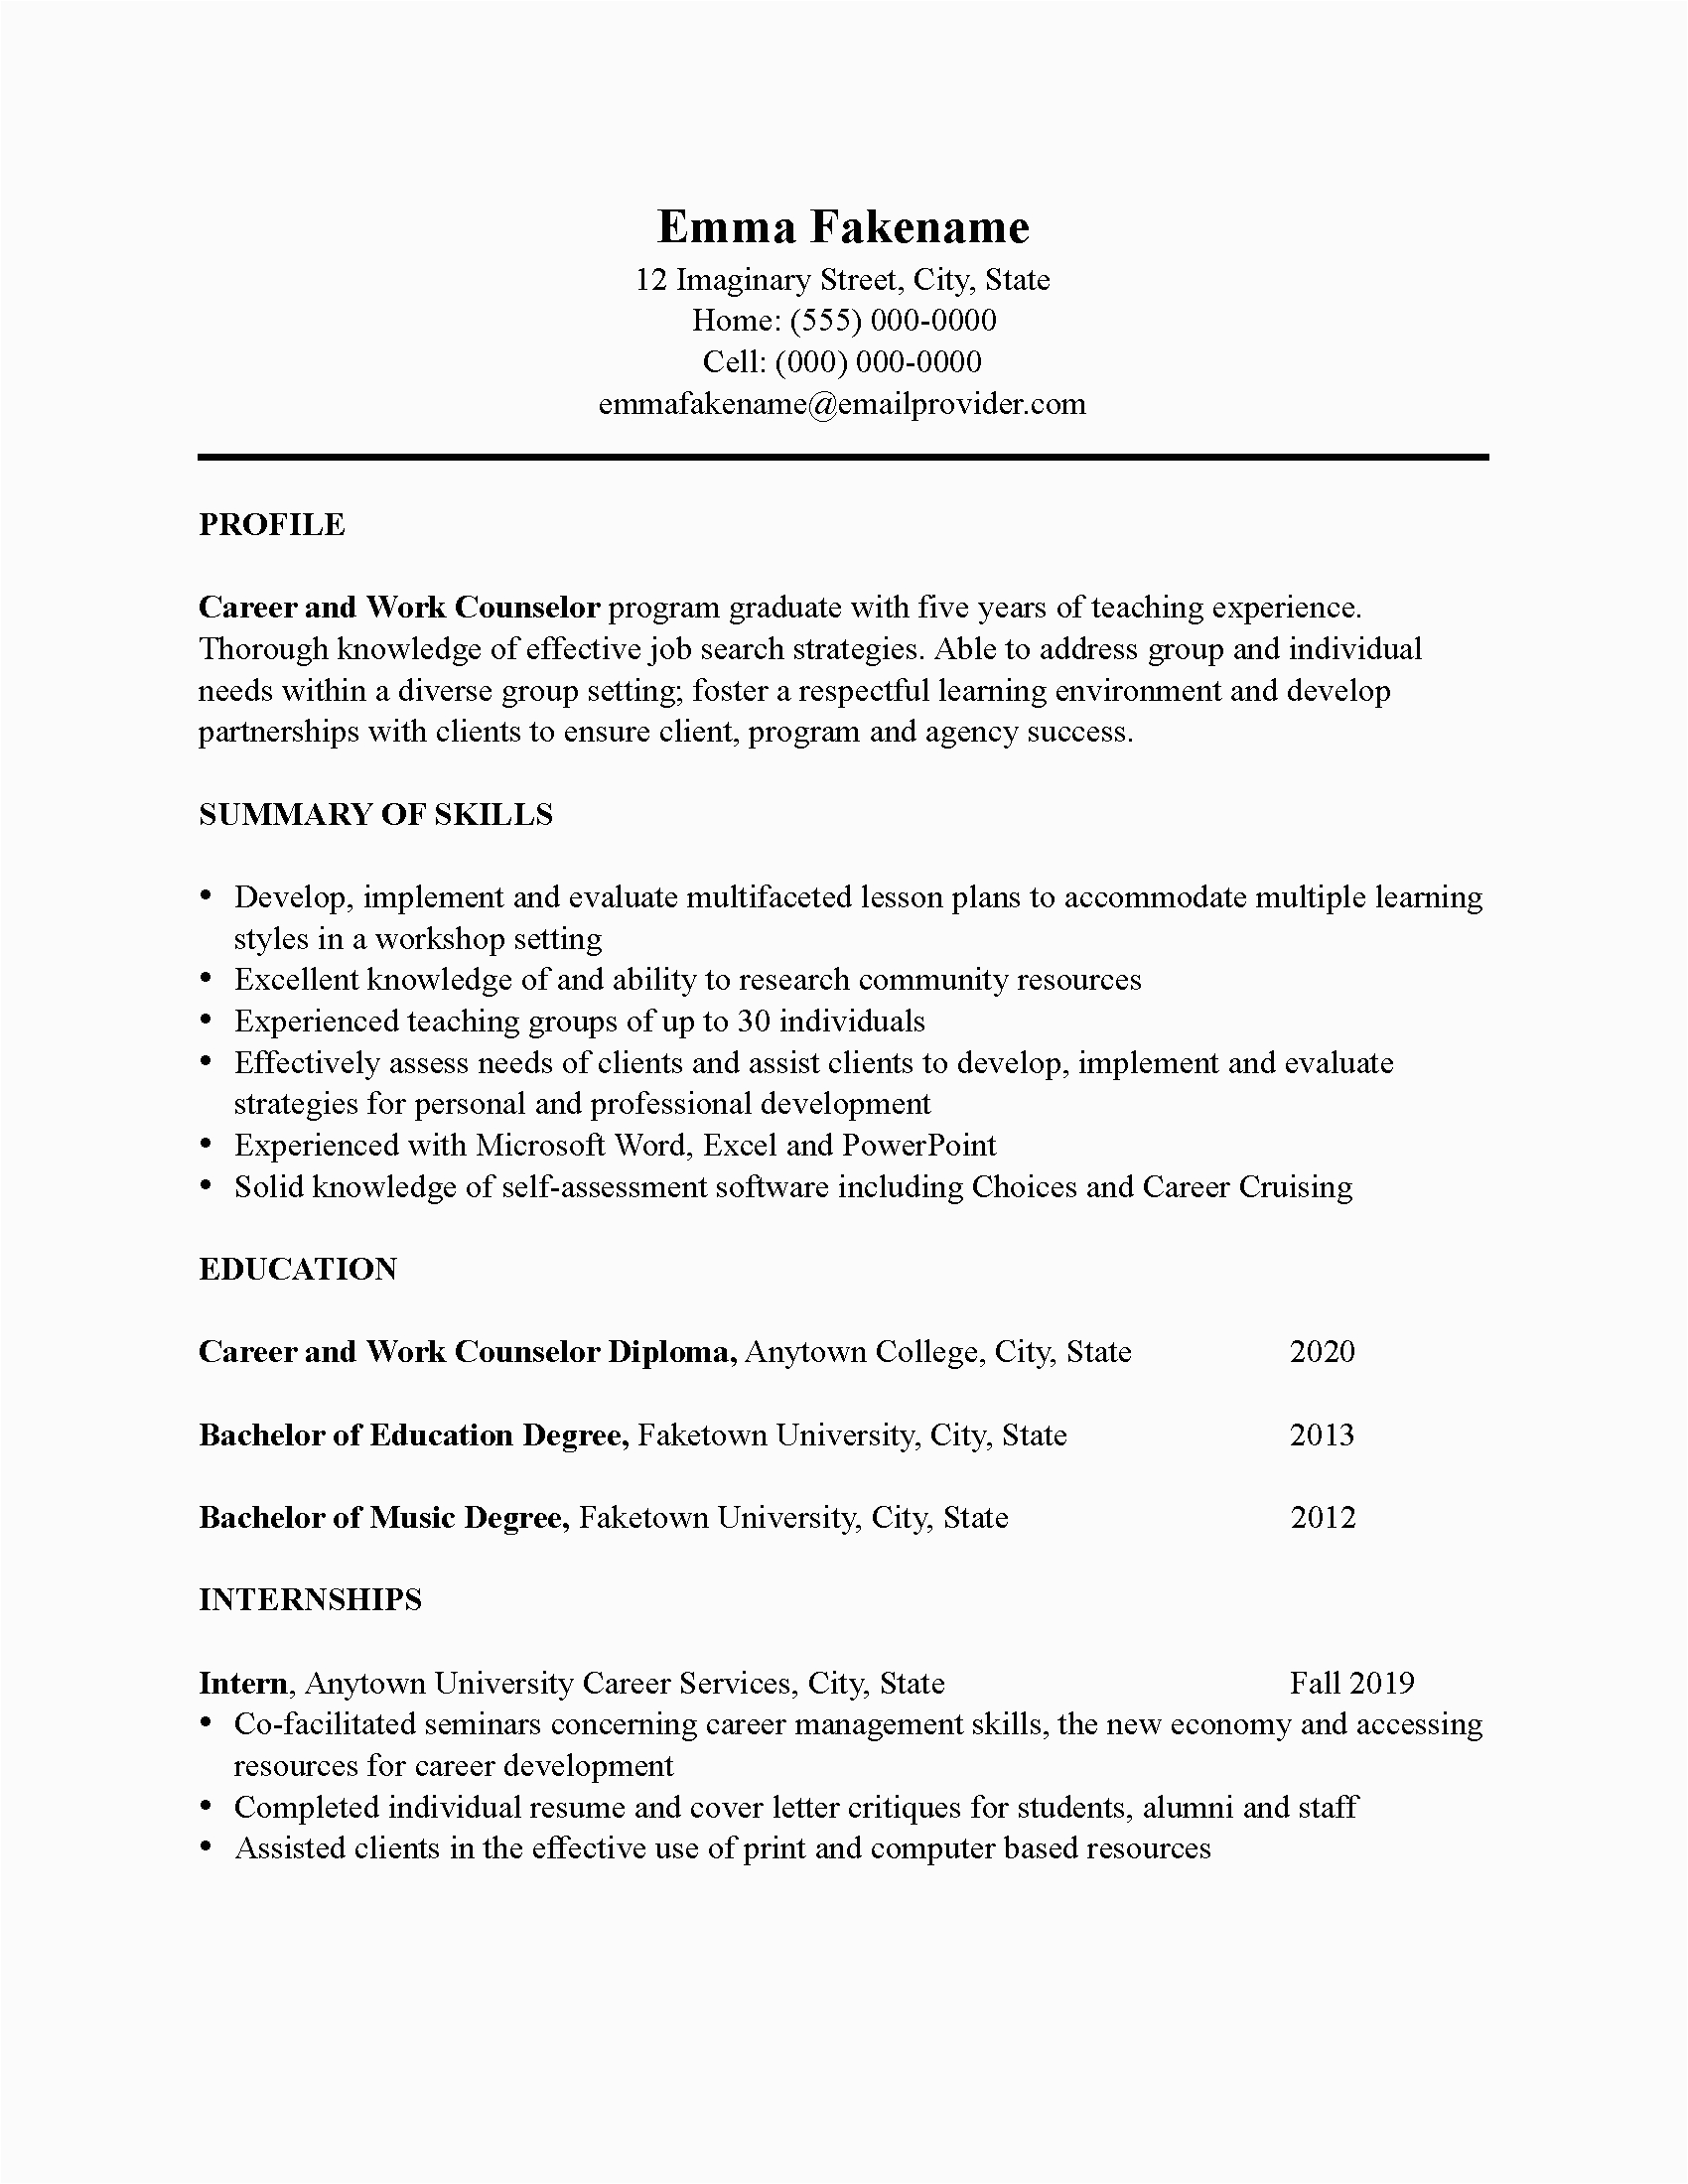 Career Change From Corporate to Teaching Resume Sample Career Change Resume Sample In 2020